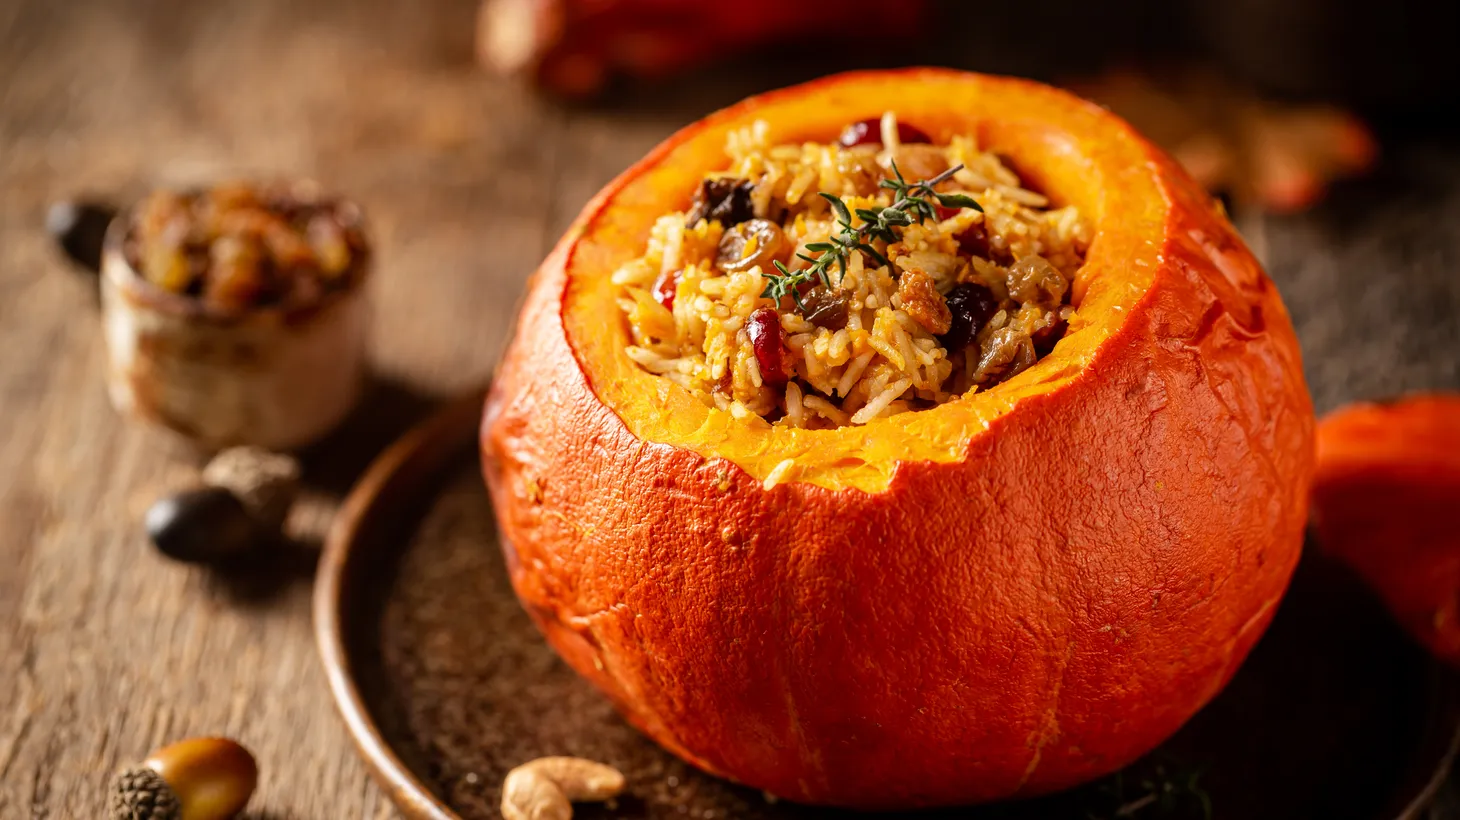 A pumpkin stuffed with rice, vegetables and herbs is a tasty and showstopping main dish for a Thanksgiving meal.